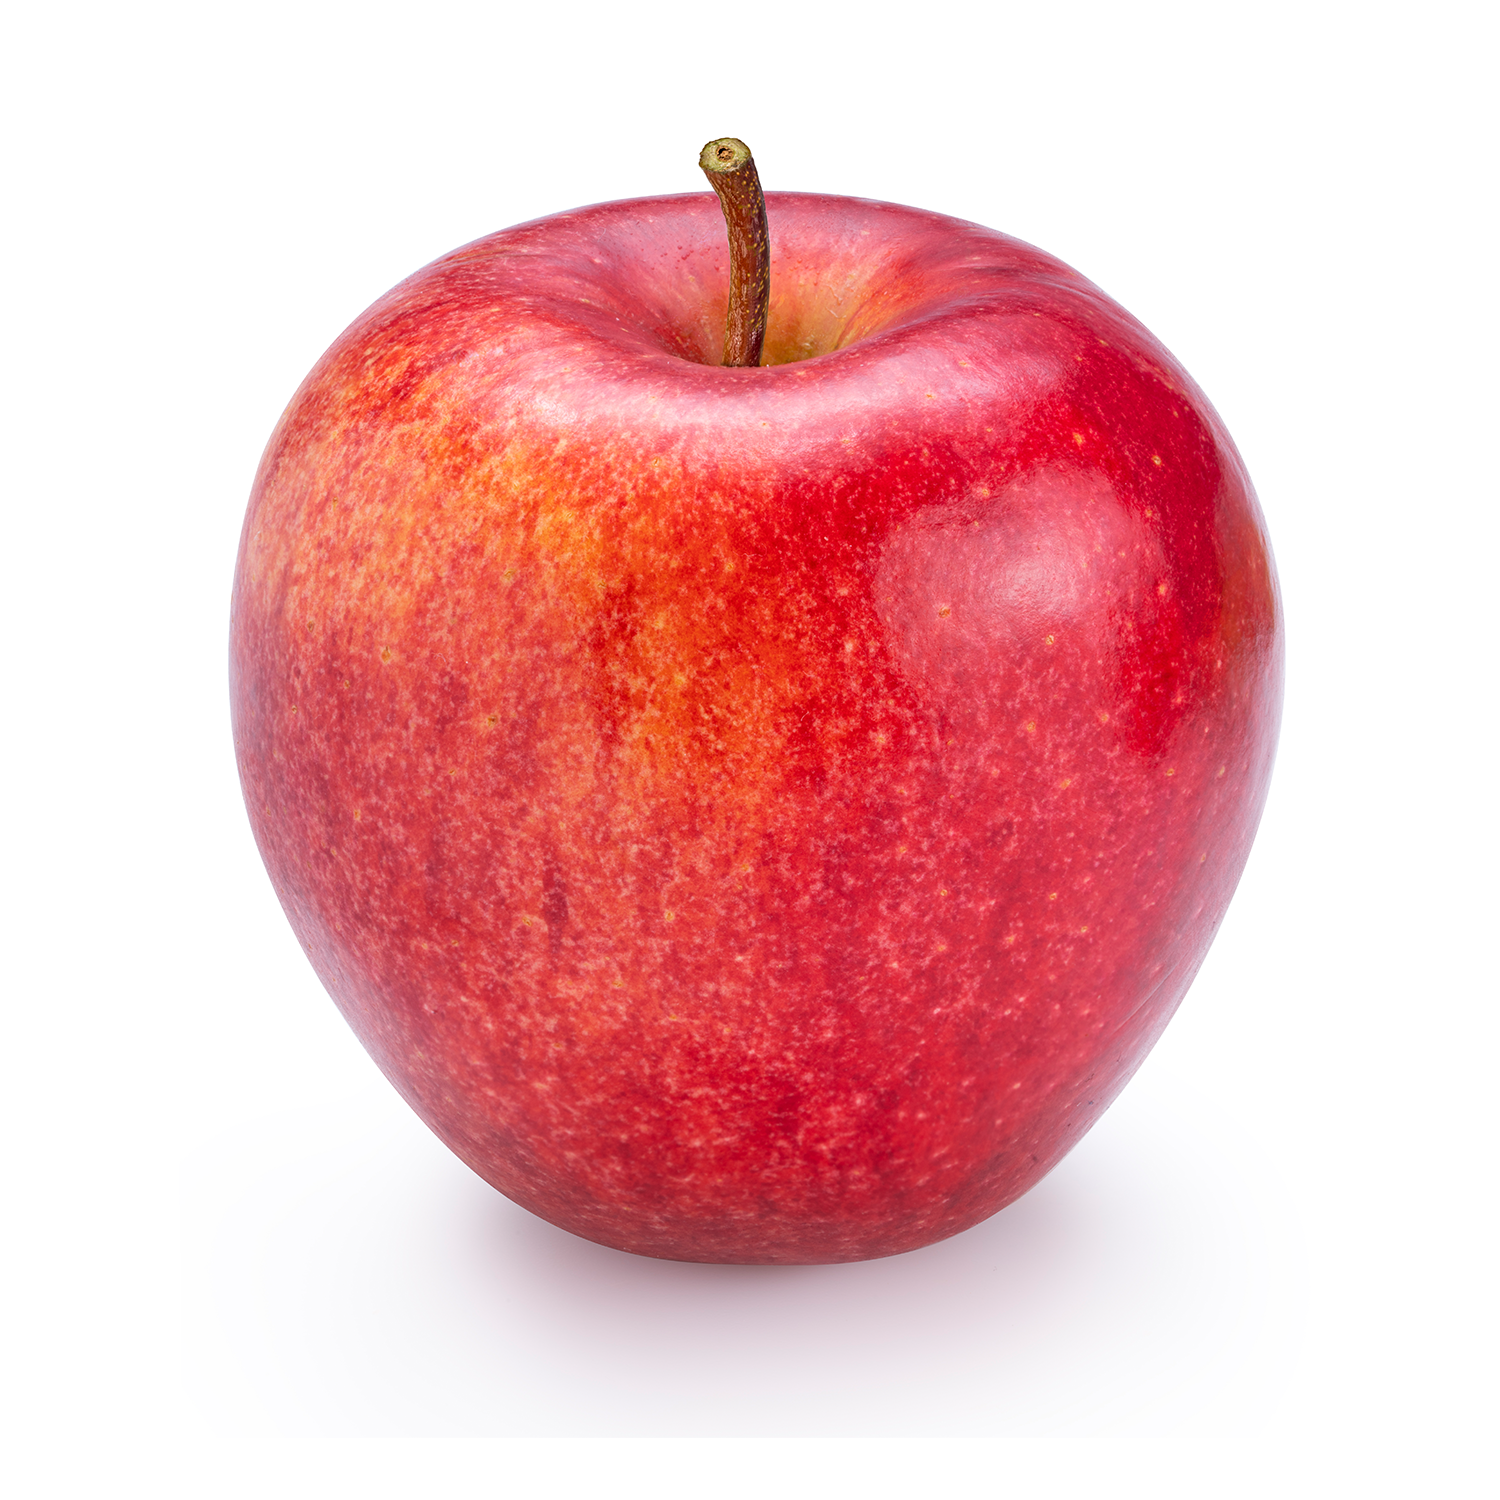 Envy apples: Sweet red apples with a coveted crunch